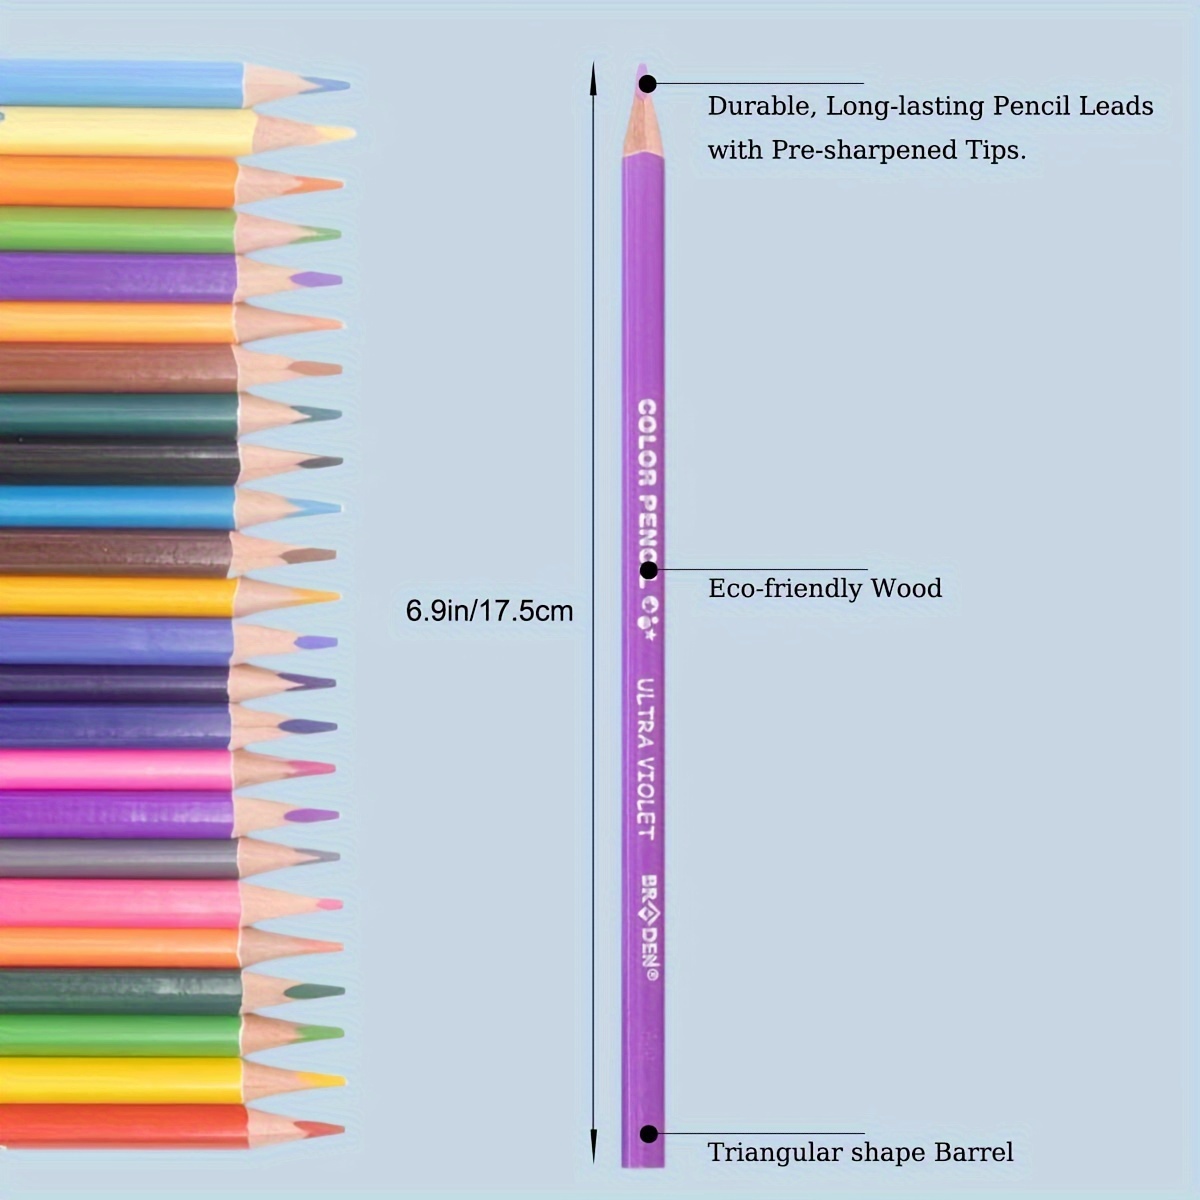 Violet purple Crayola Colored Pencils Set of 5 or 10 With Sharpener 